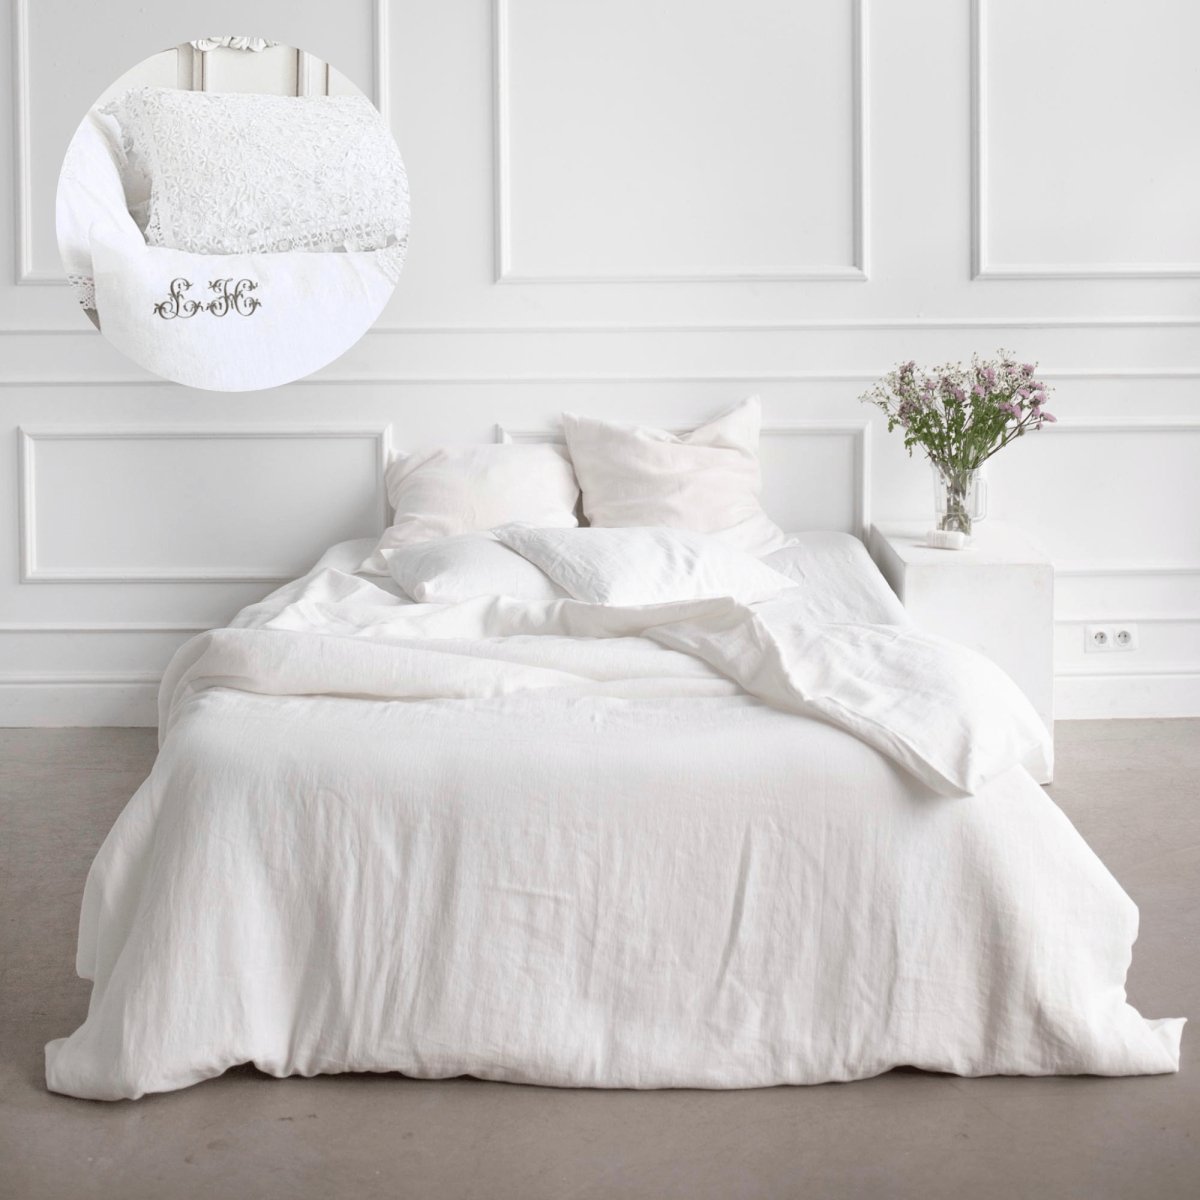 French Embroidered Monogram White 100% Linen Duvet Cover + Pair Pillowcases - Linen and Letters